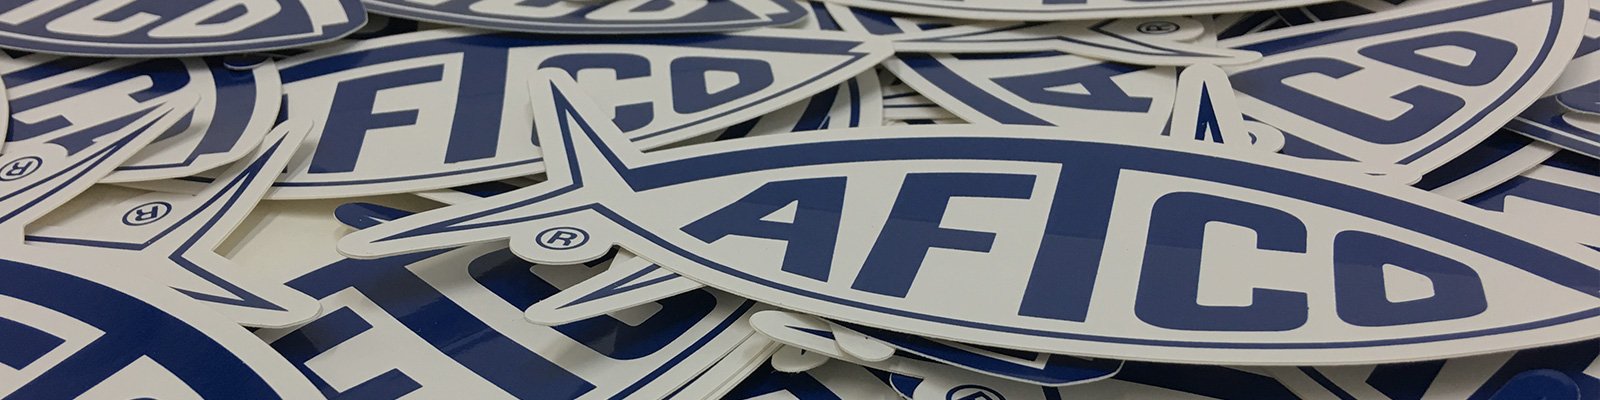 FREE AFTCO Fishing Stickers